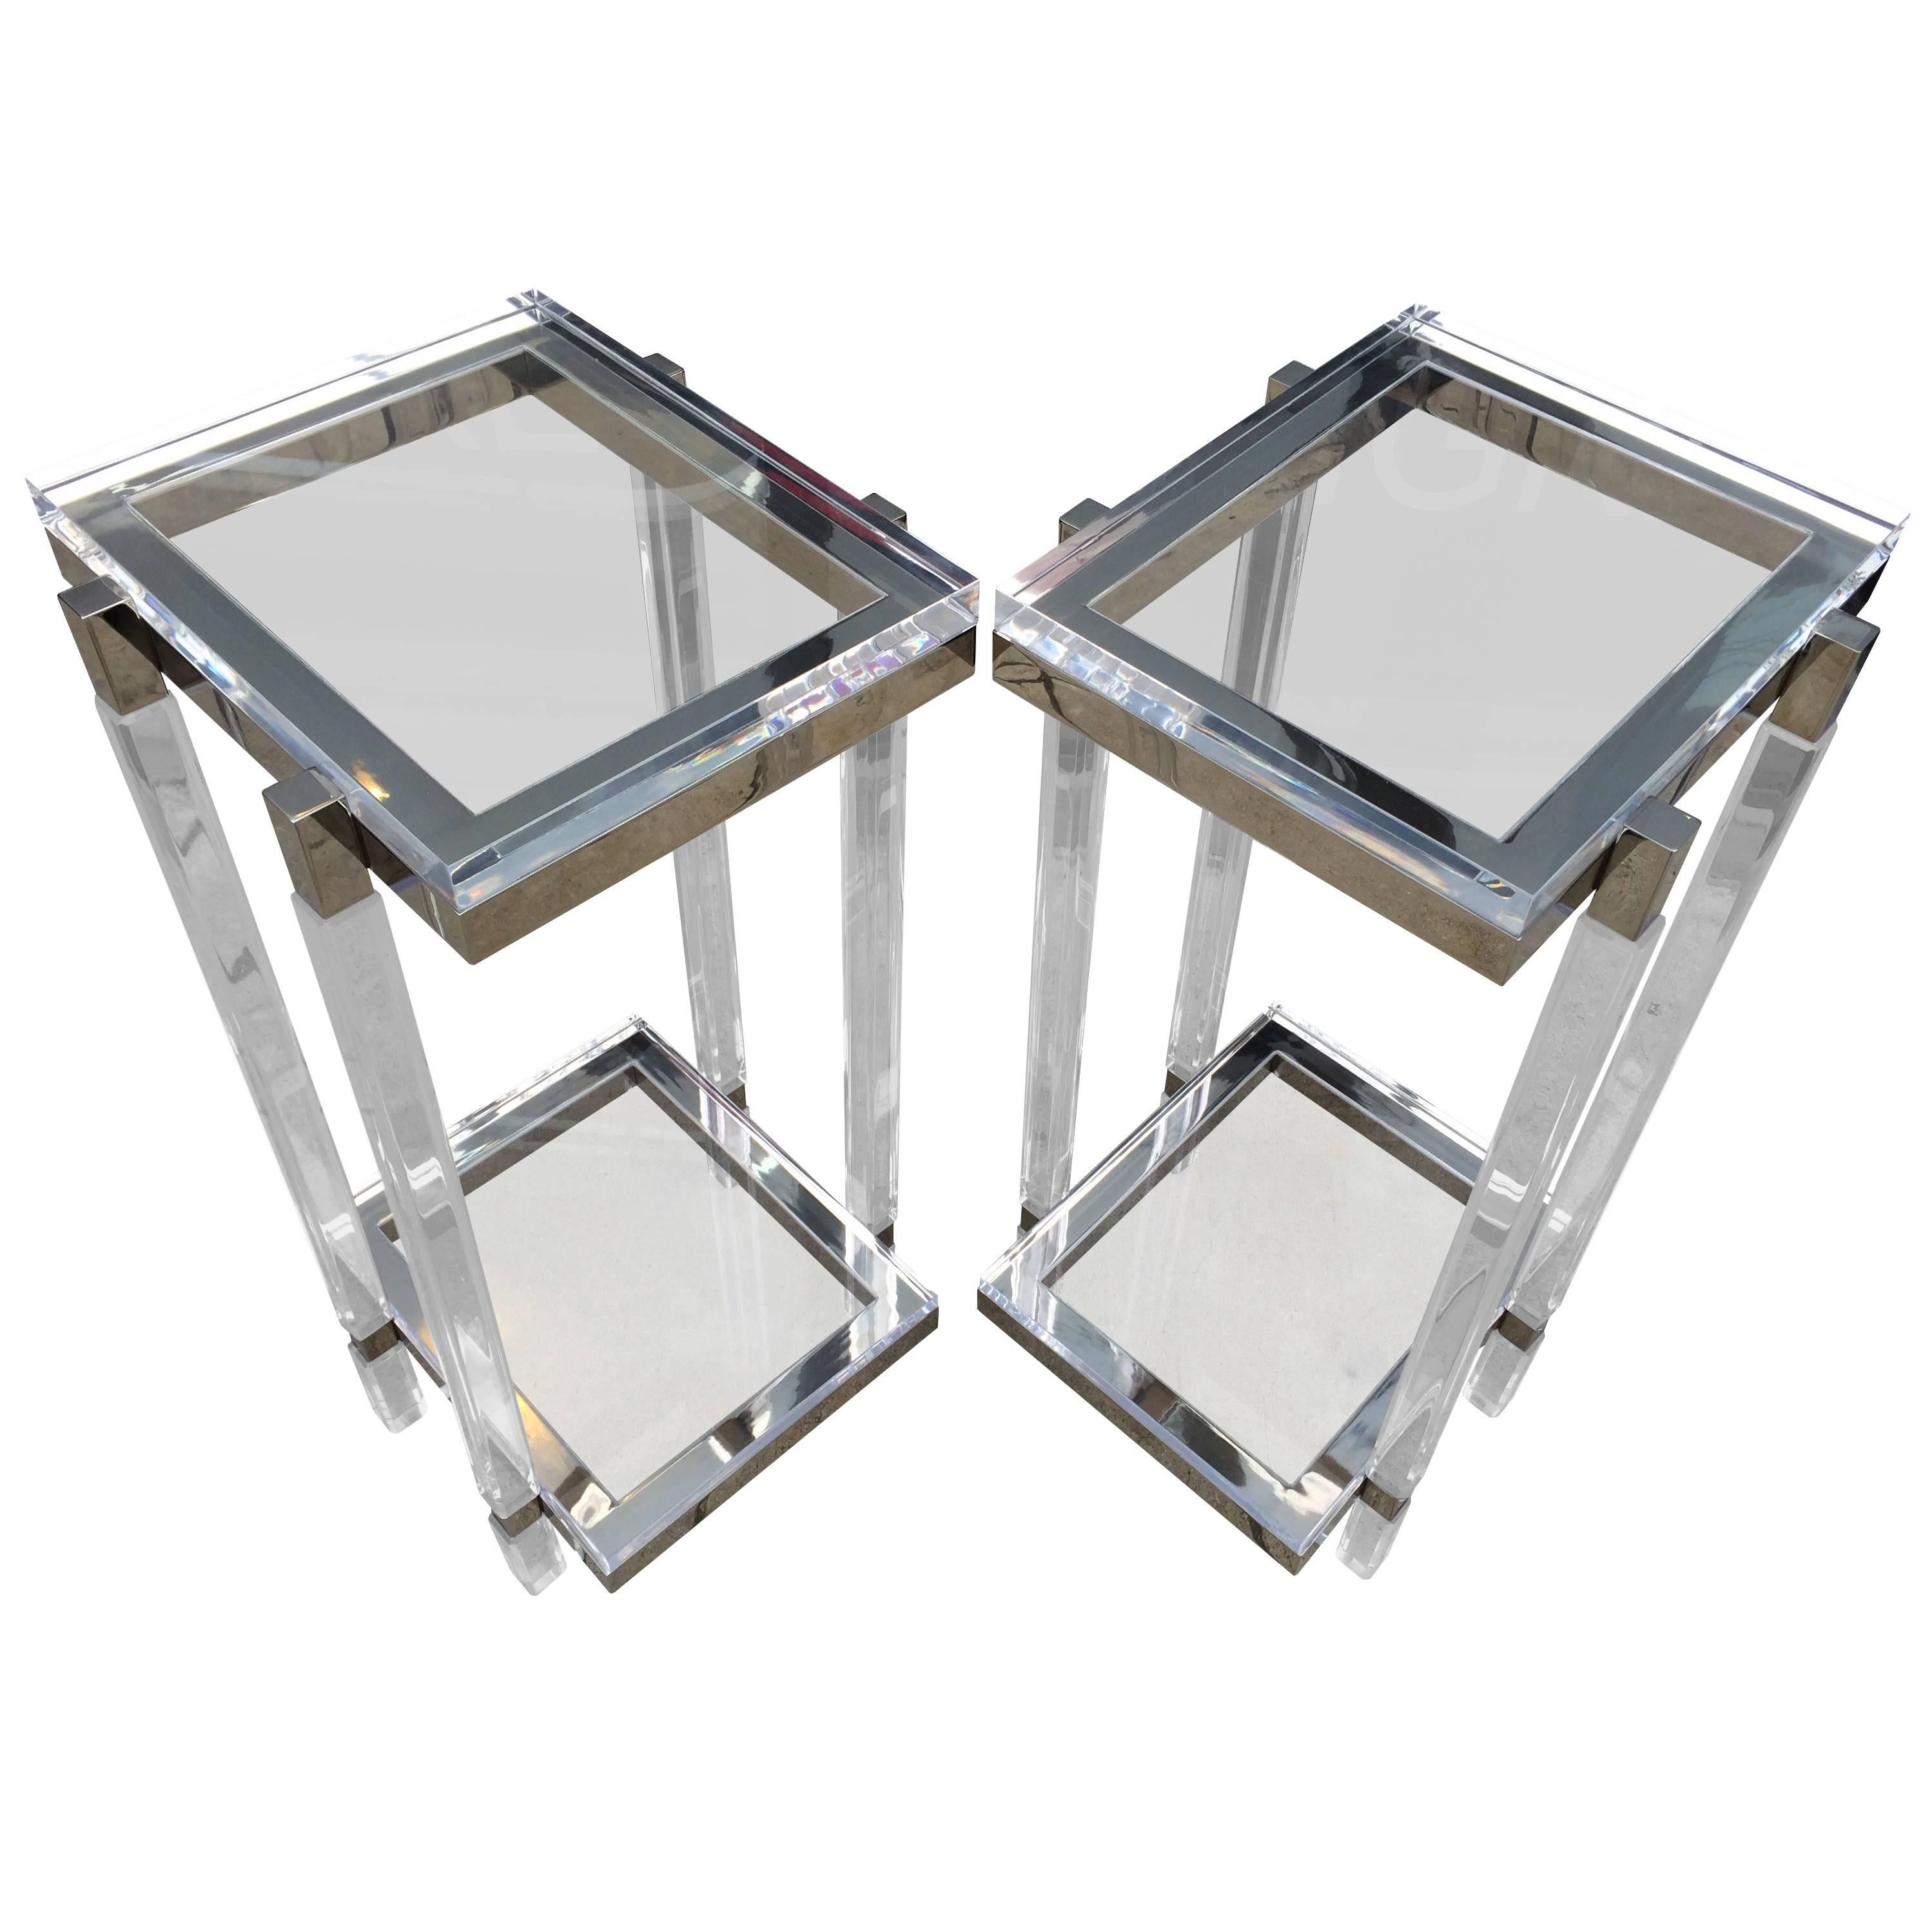 Lucite and Polished Nickel Pedestals/Tables by Charles Hollis Jones